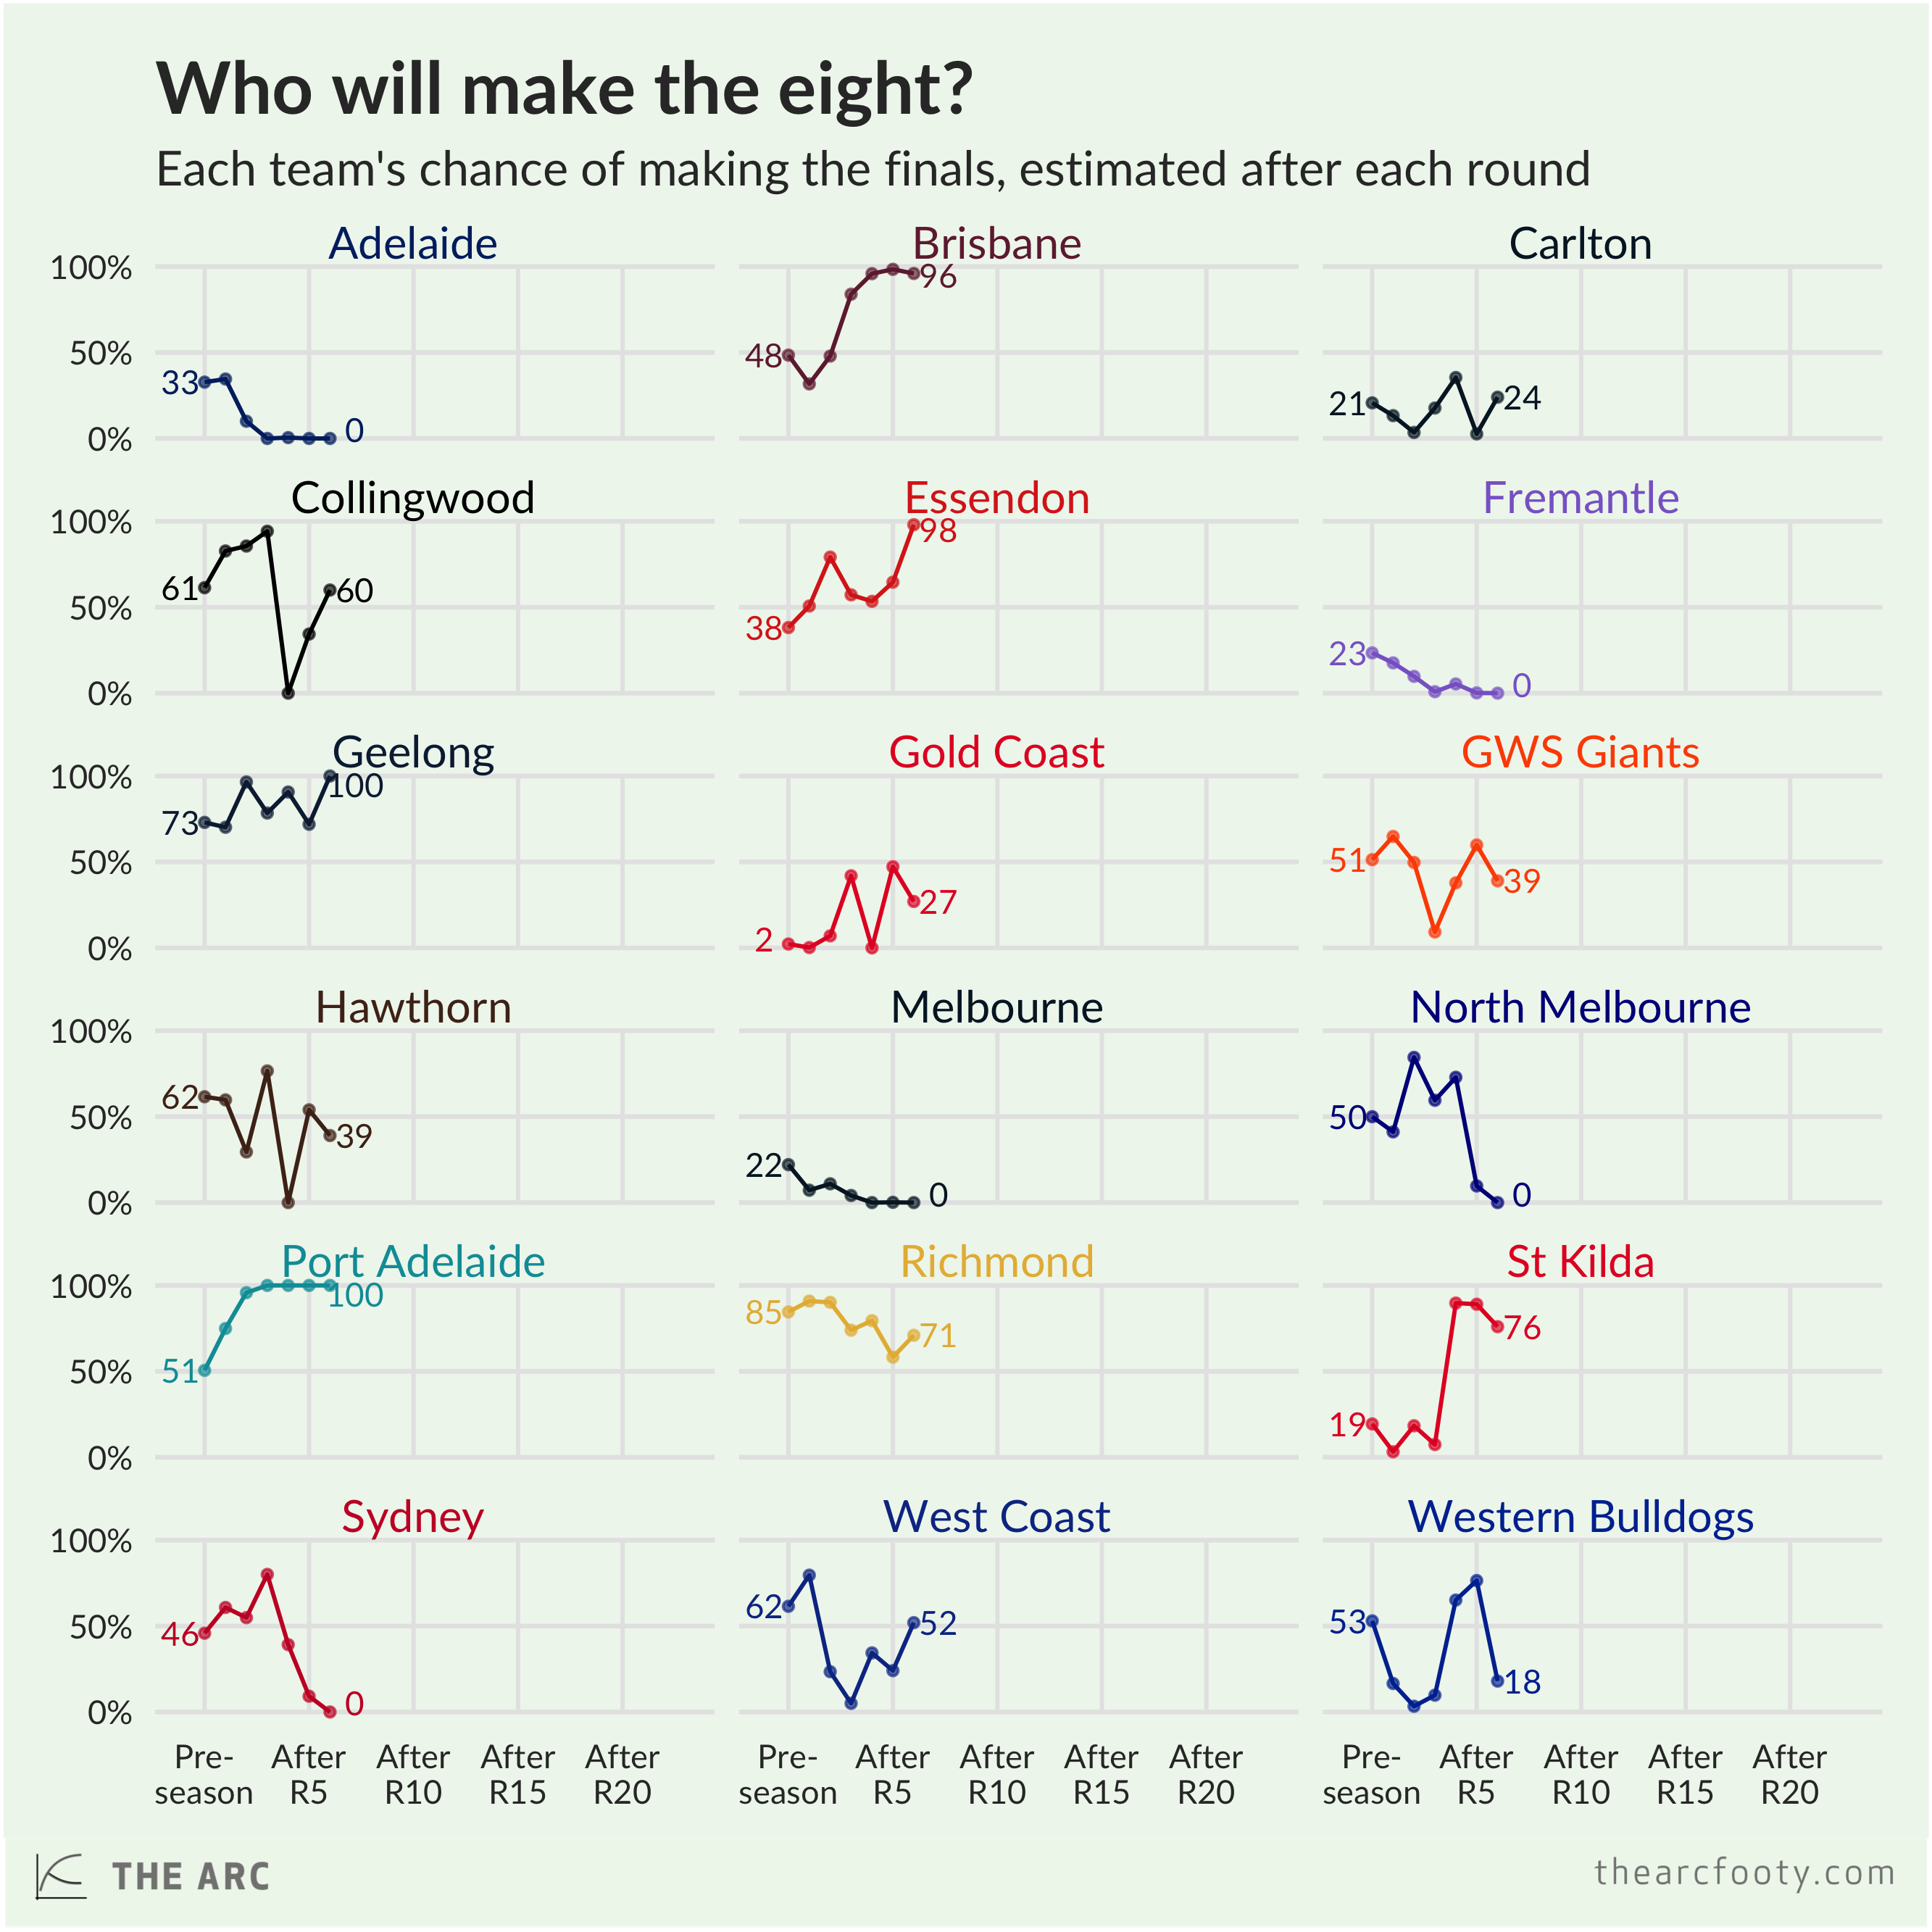 How has each team's chance of making the finals changed over time?